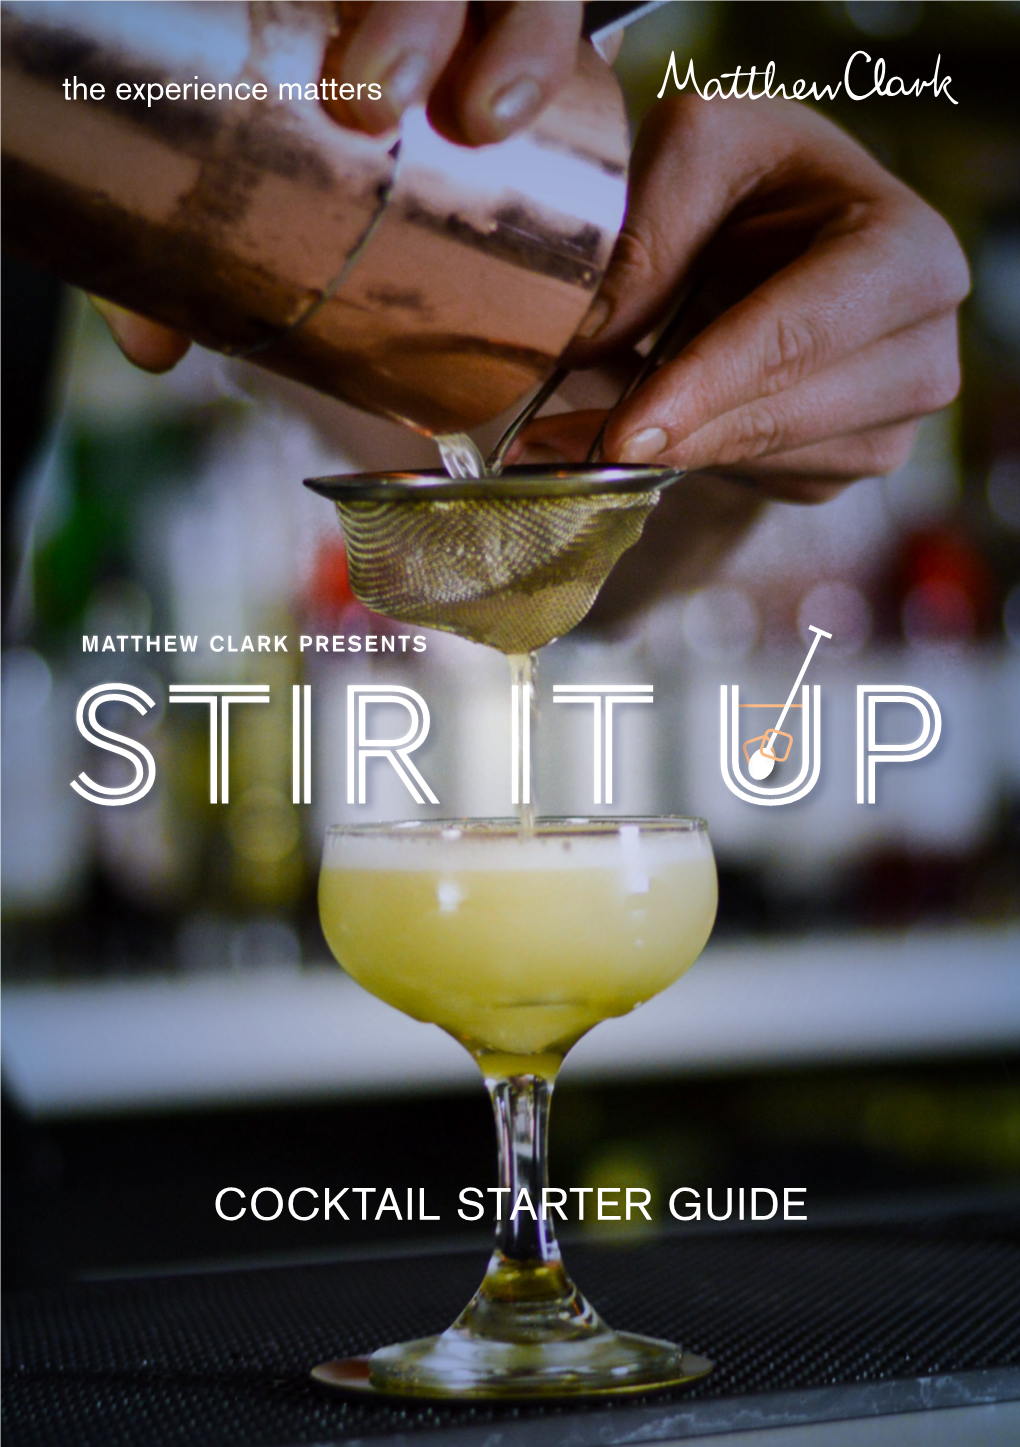 COCKTAIL STARTER GUIDE Content